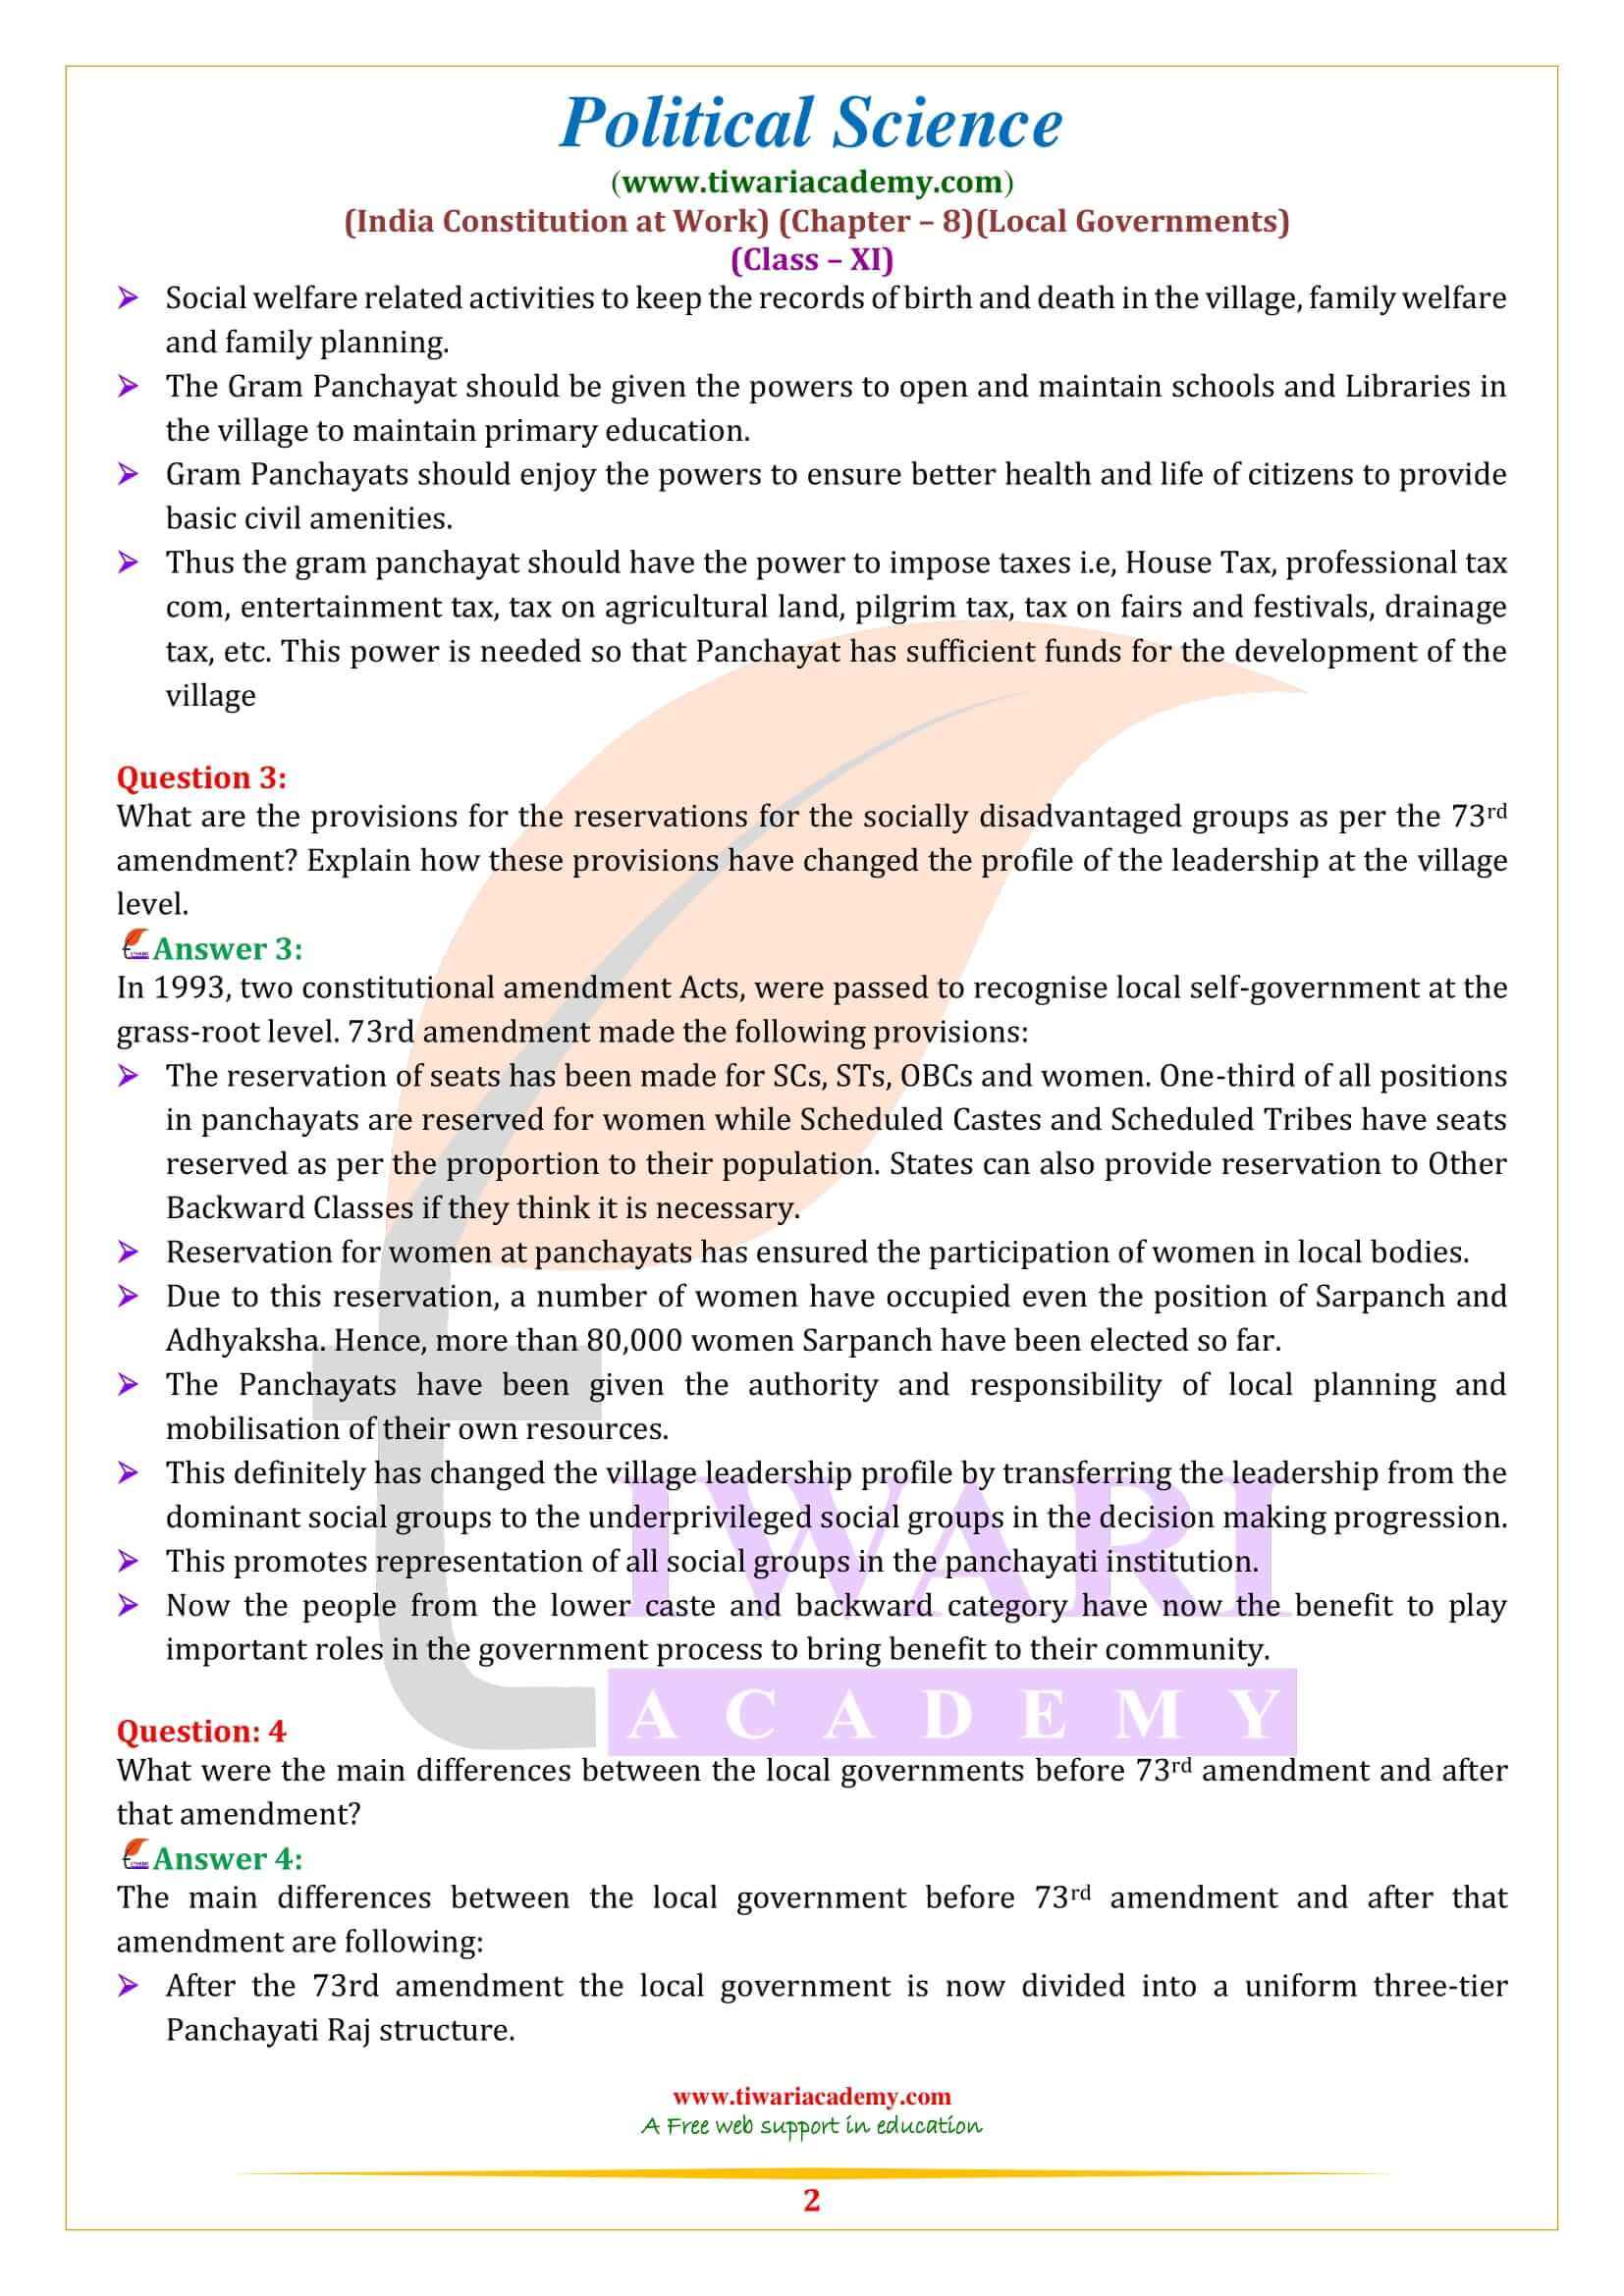 NCERT Solutions for Class 11 Political Science Chapter 8